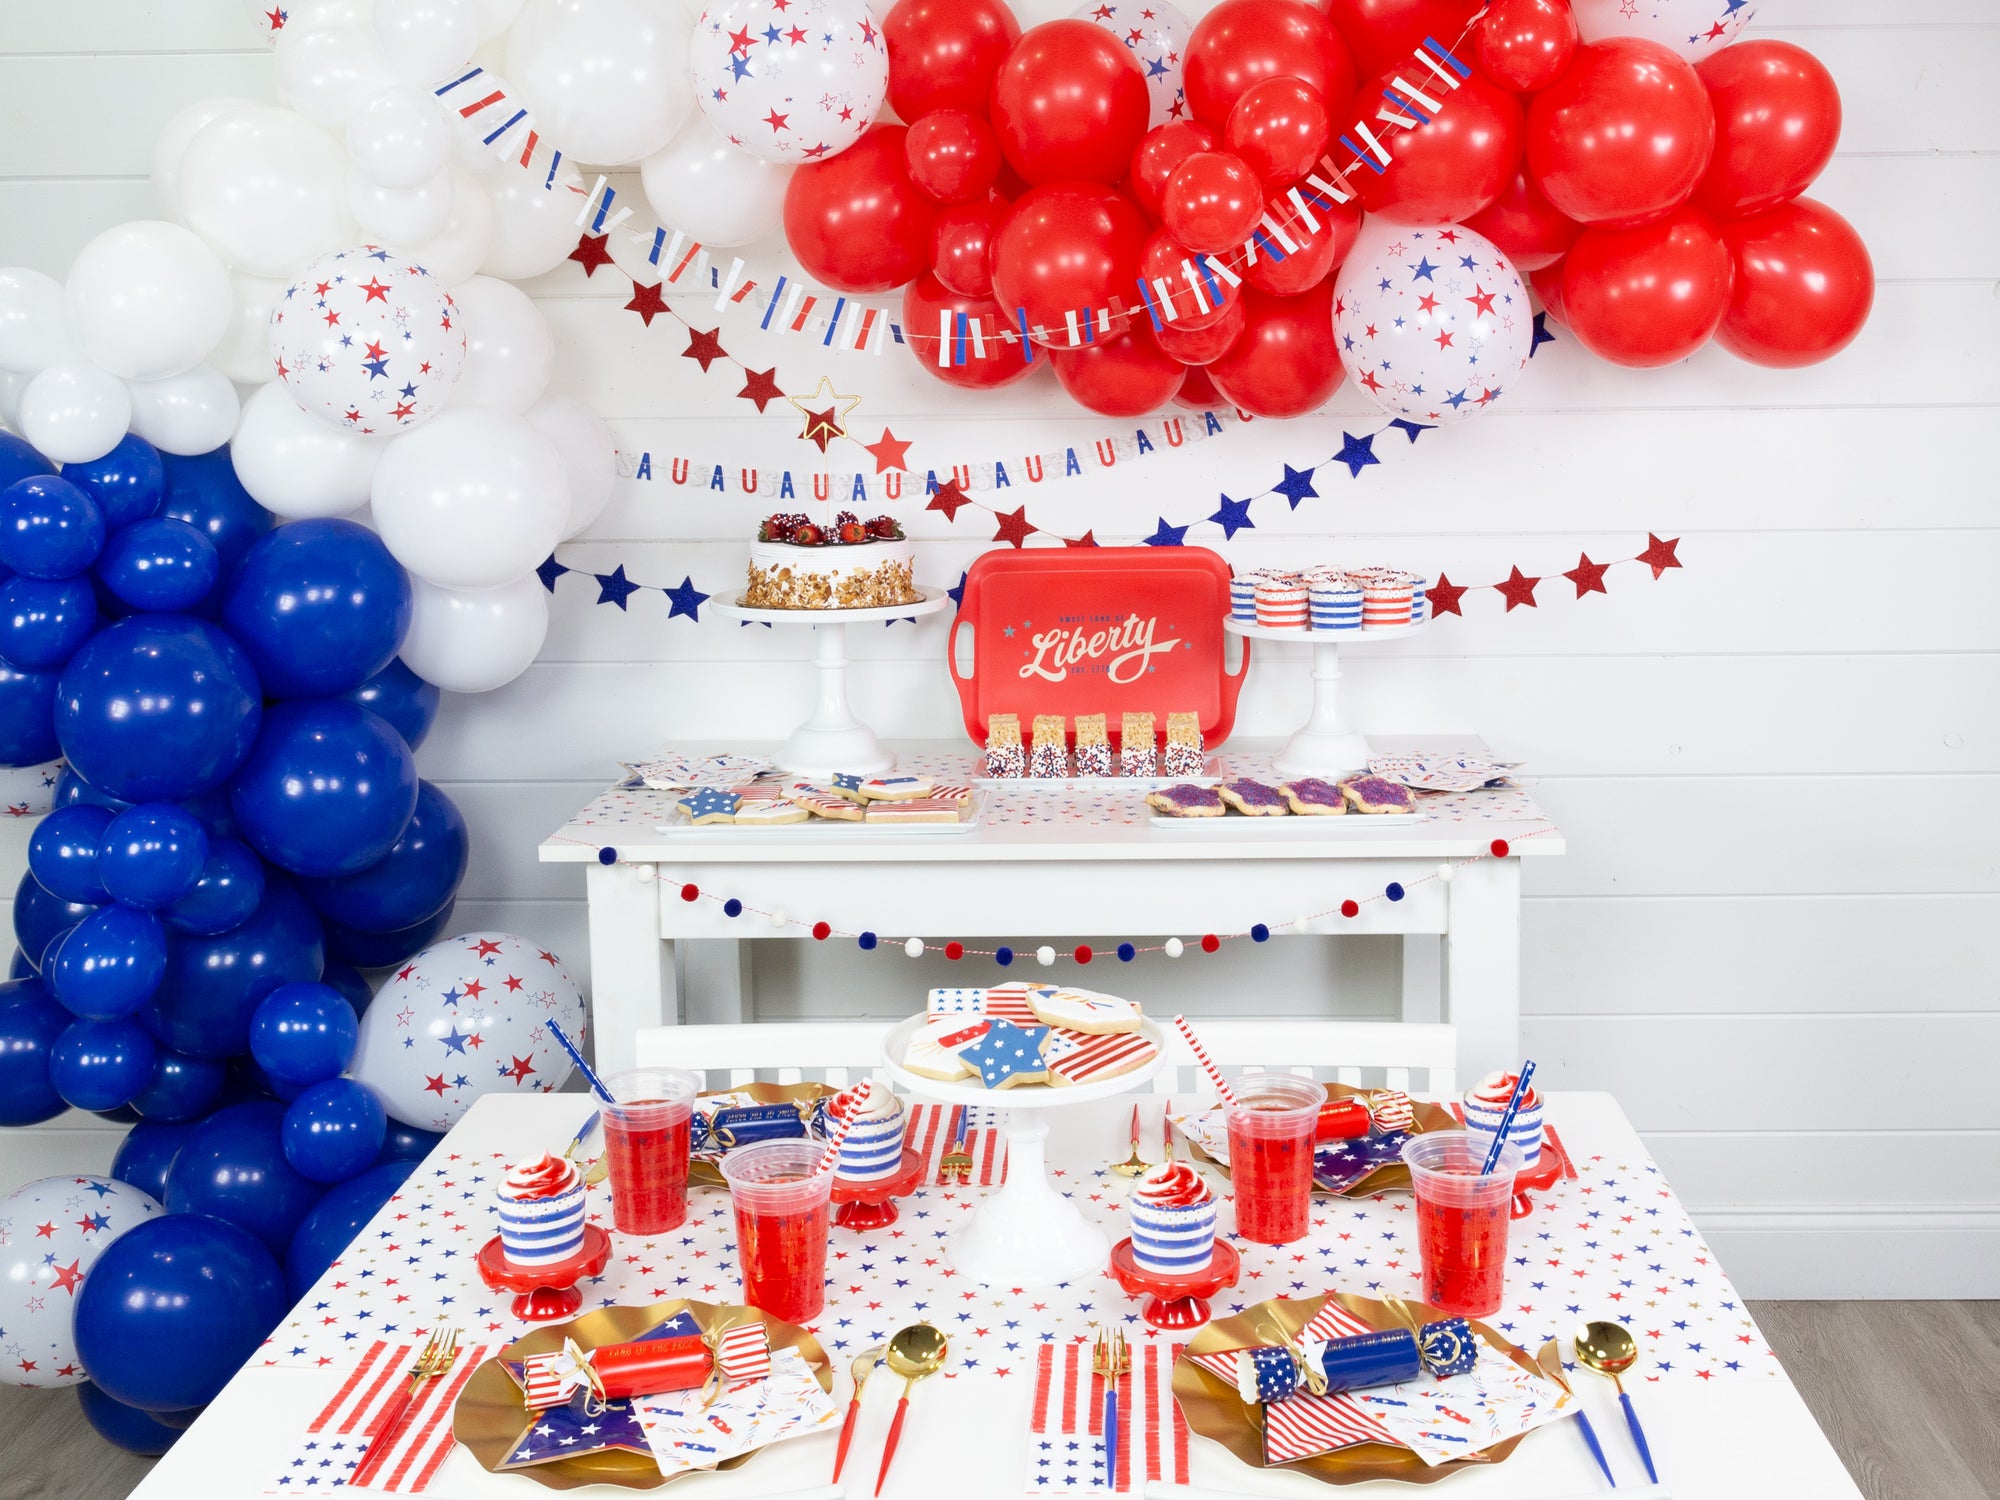 4th of July Party Ideas to Throw A Star-Spangled Banger